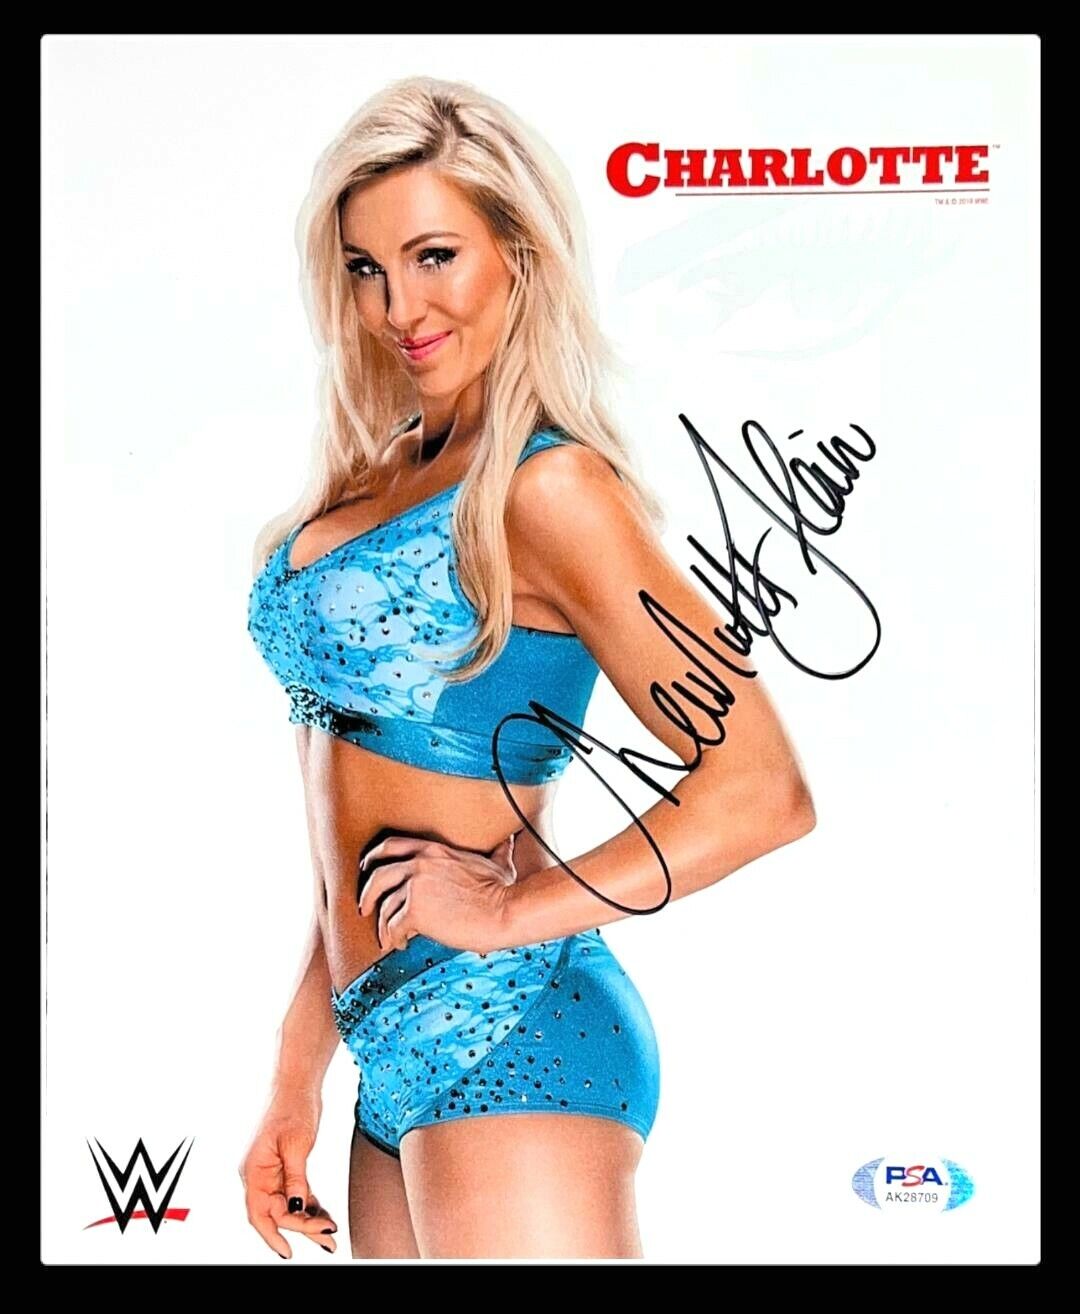 WWE CHARLOTTE FLAIR HAND SIGNED AUTOGRAPHED 8X10 PROMO Photo Poster painting WITH PSA COA RARE